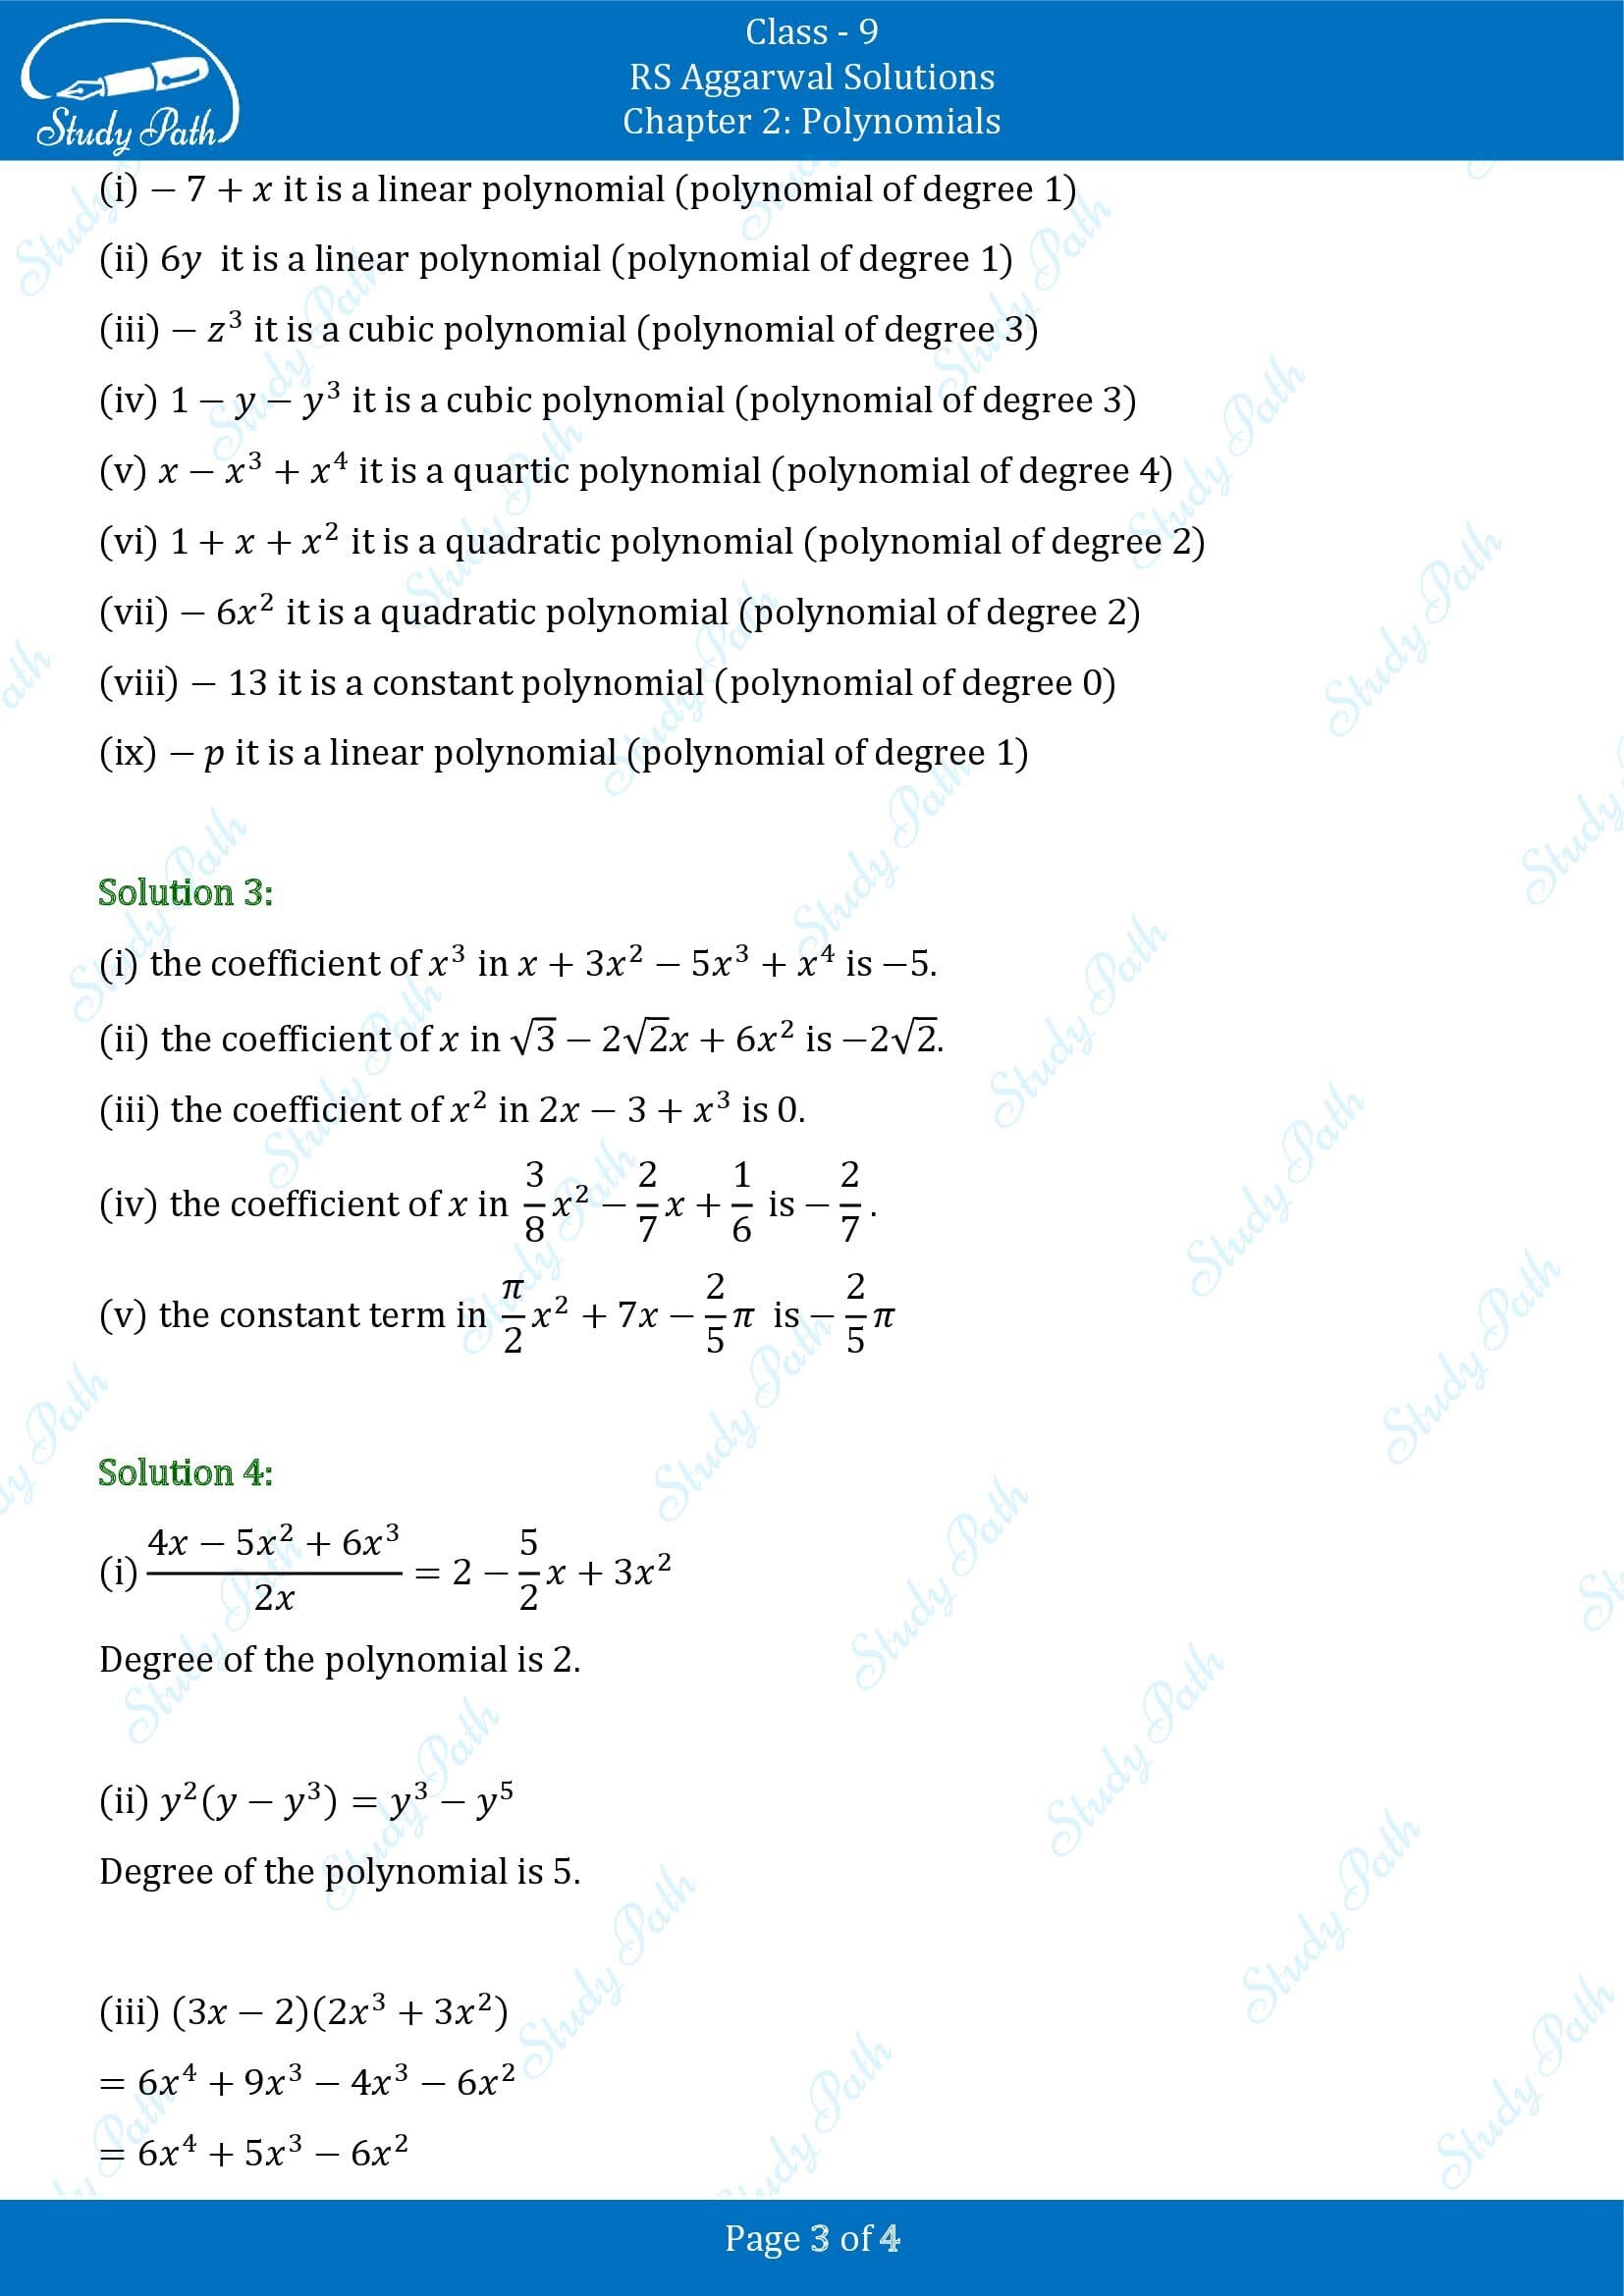 RS Aggarwal Solutions Class 9 Chapter 2 Polynomials Exercise 2A 003